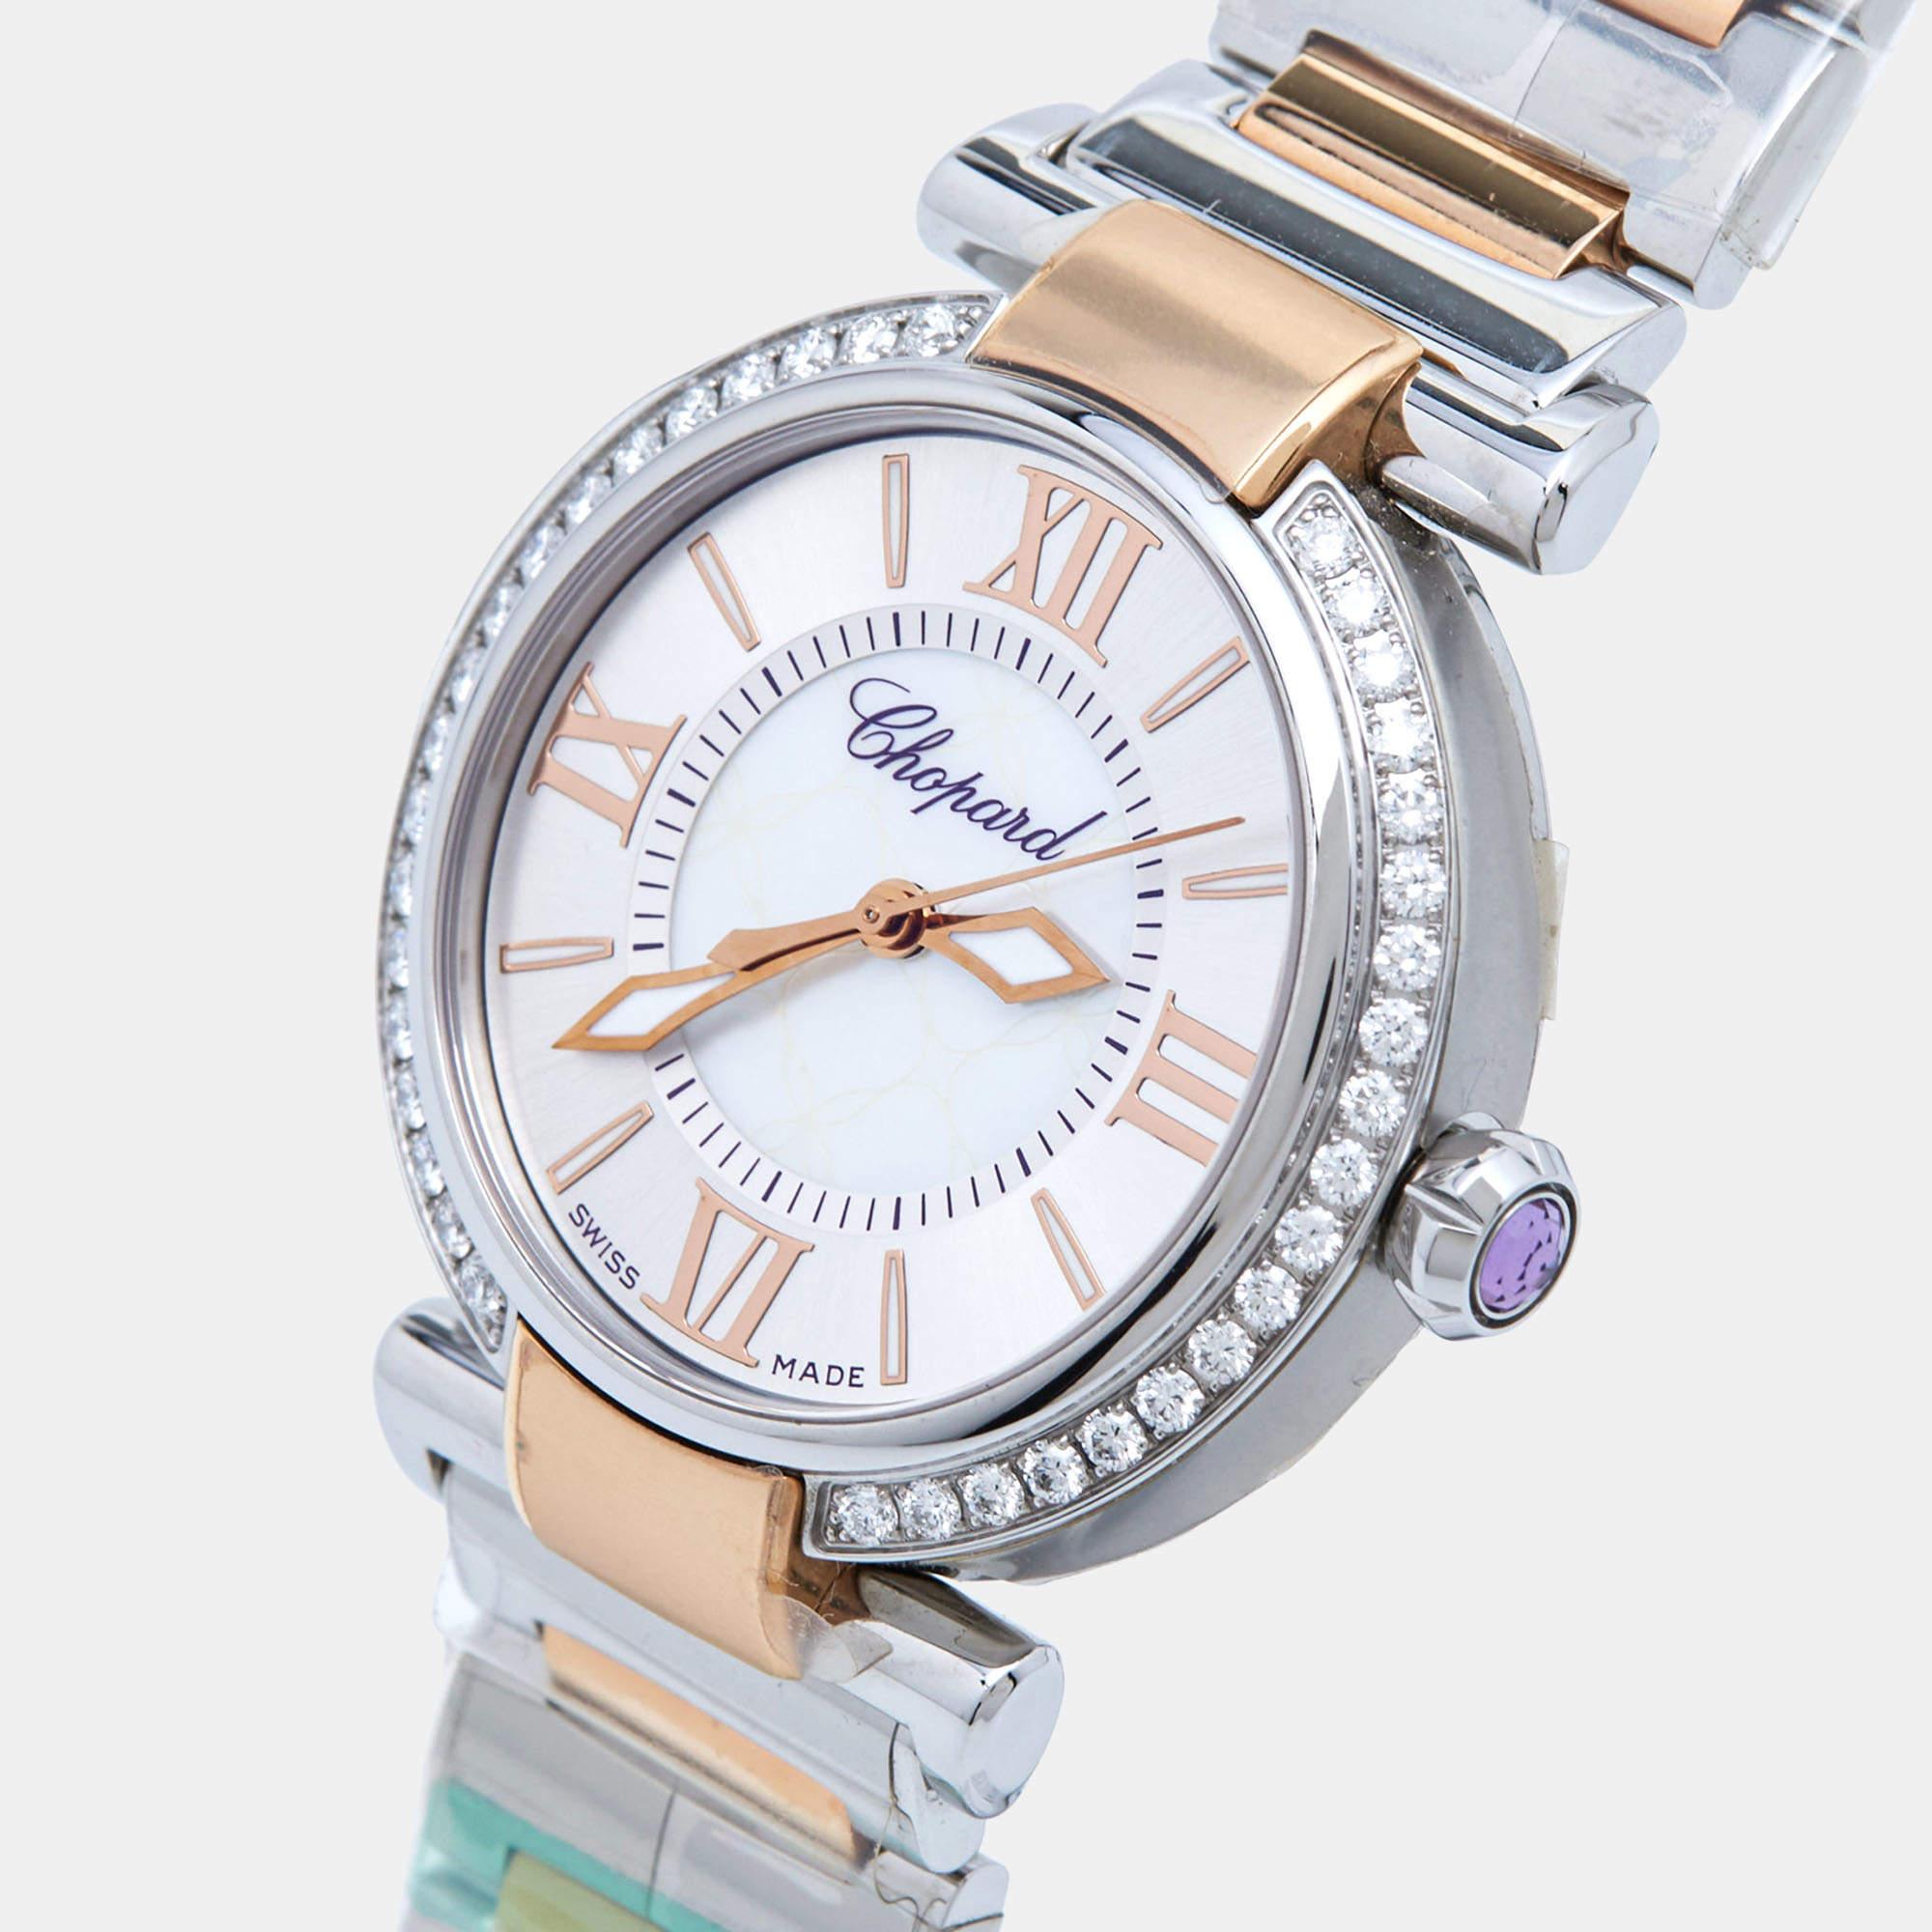 Chopard Mother Of Pearl Diamond 18K Rose Stainless Steel Imperiale 388563-6008 W In New Condition For Sale In Dubai, Al Qouz 2